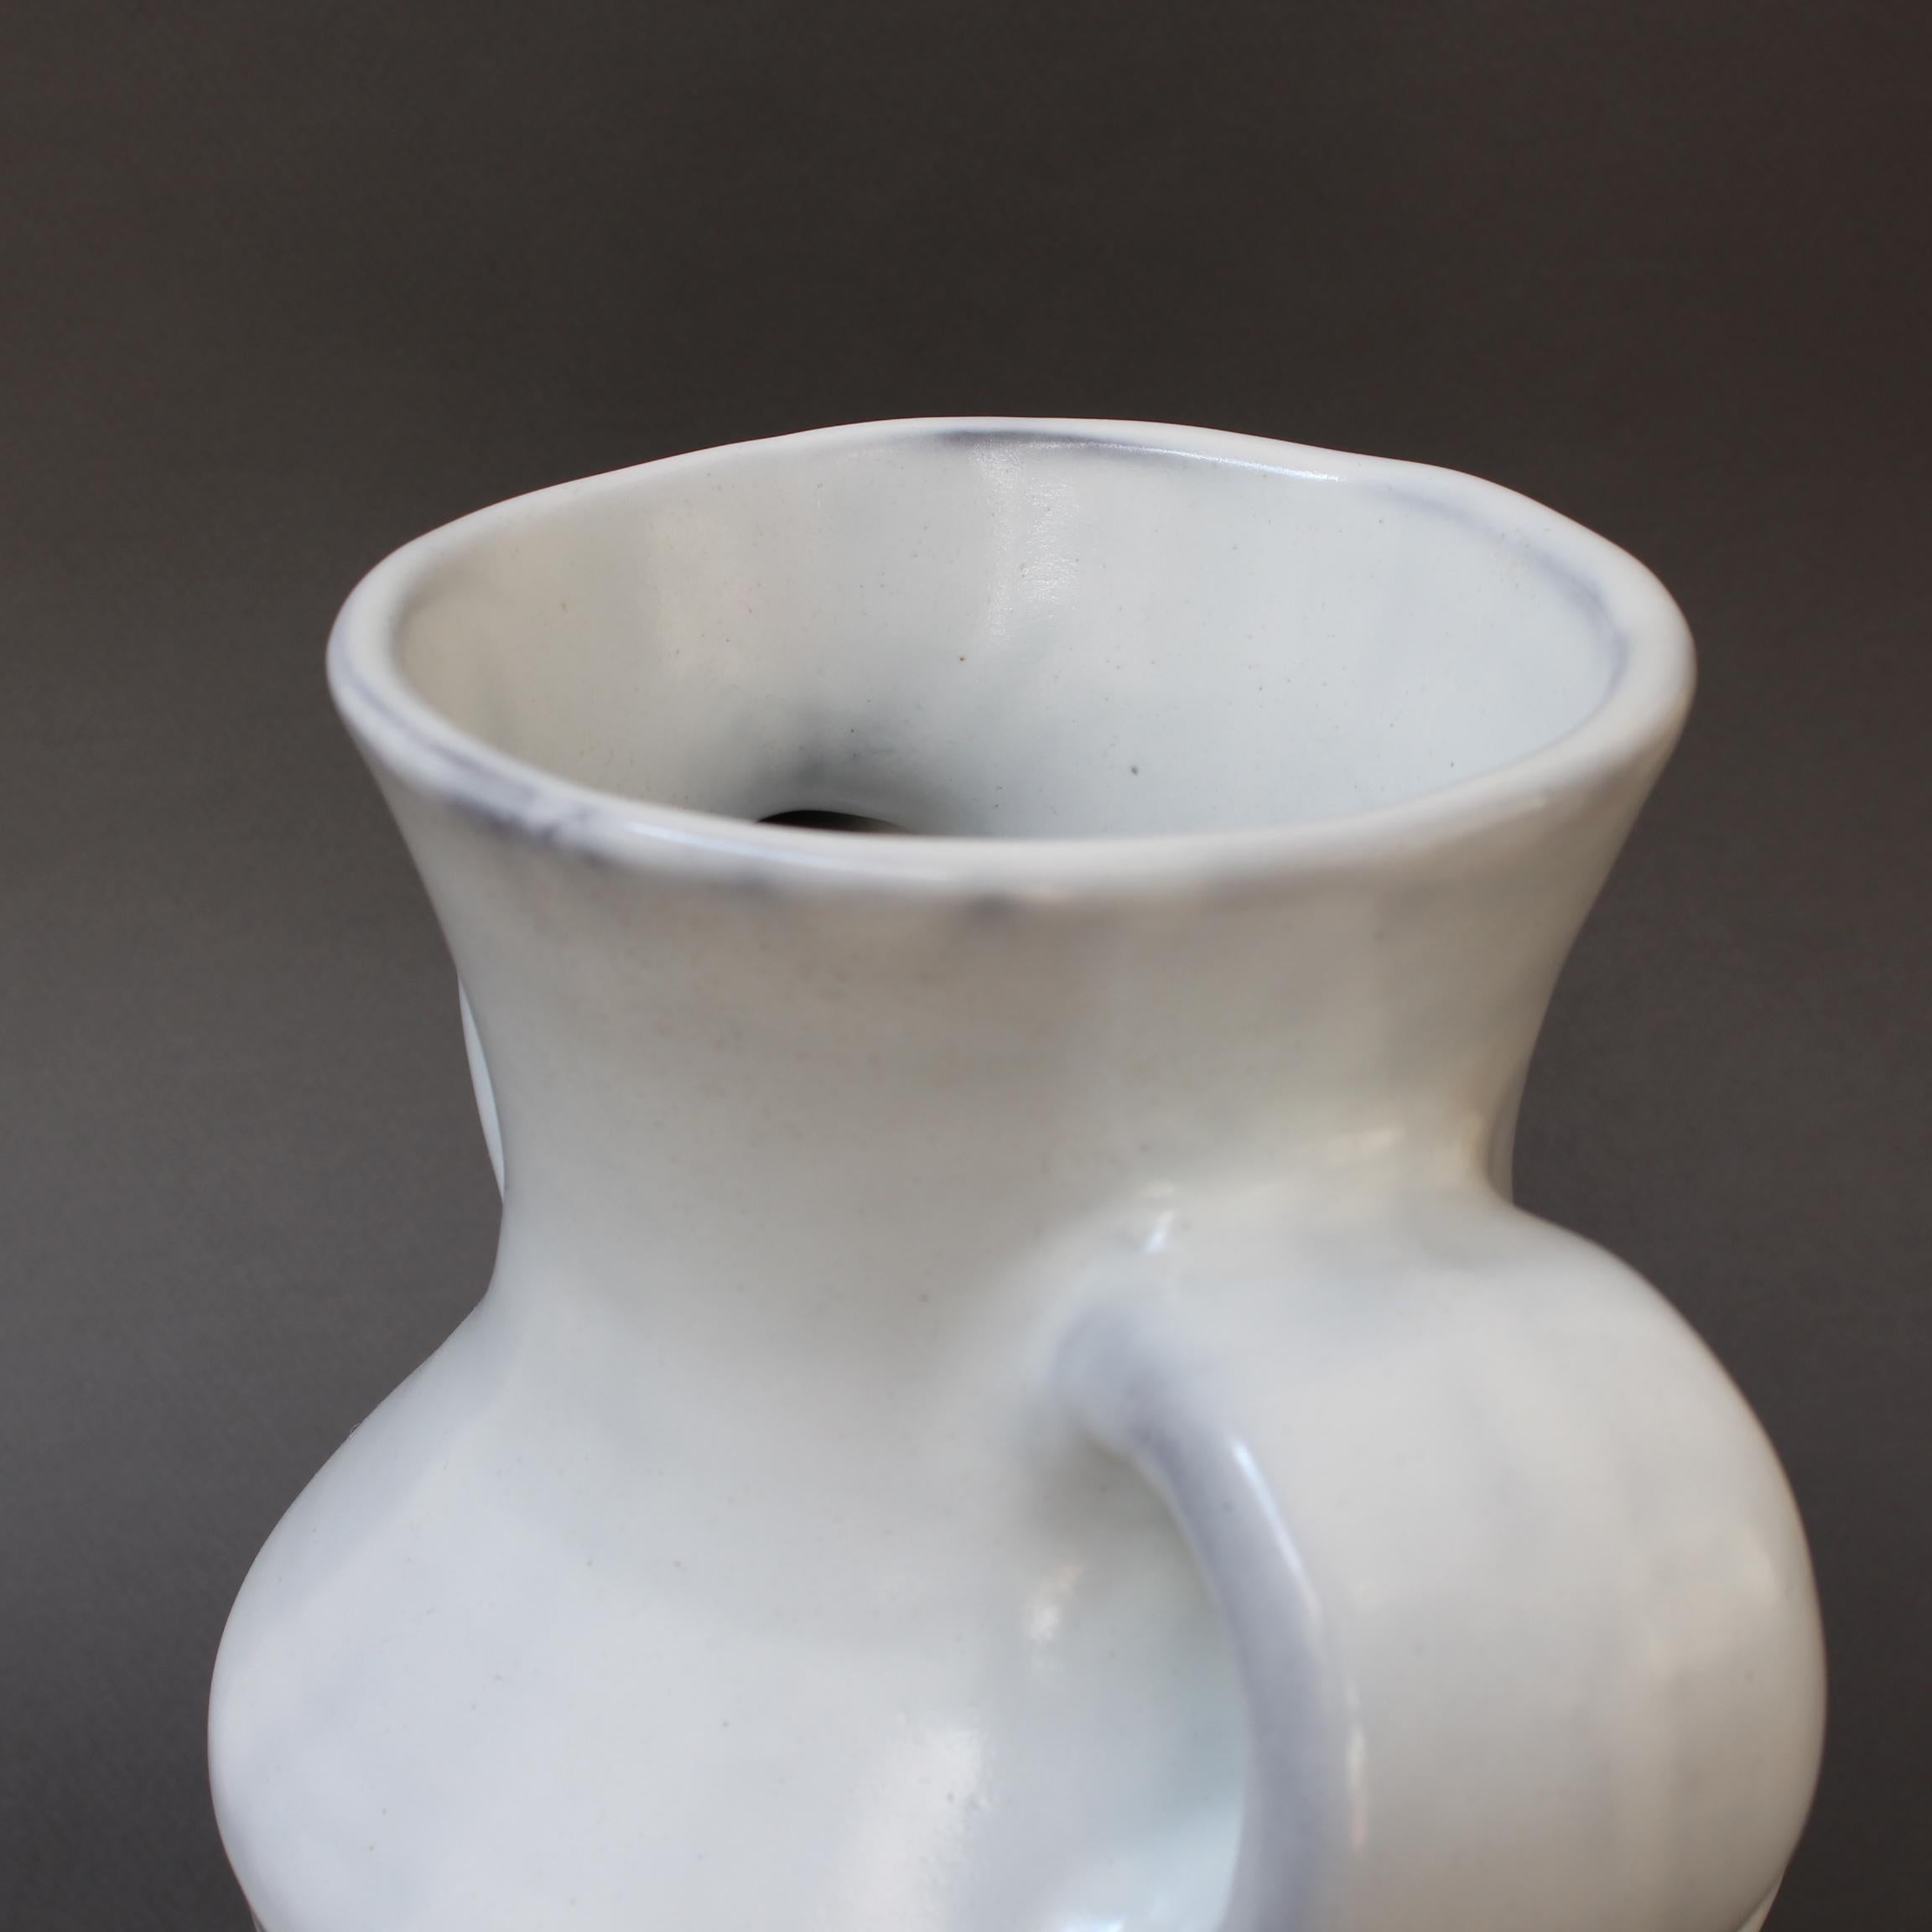 Vintage French Ceramic Vase with Handles by Roger Capron, 'circa 1950s' For Sale 13